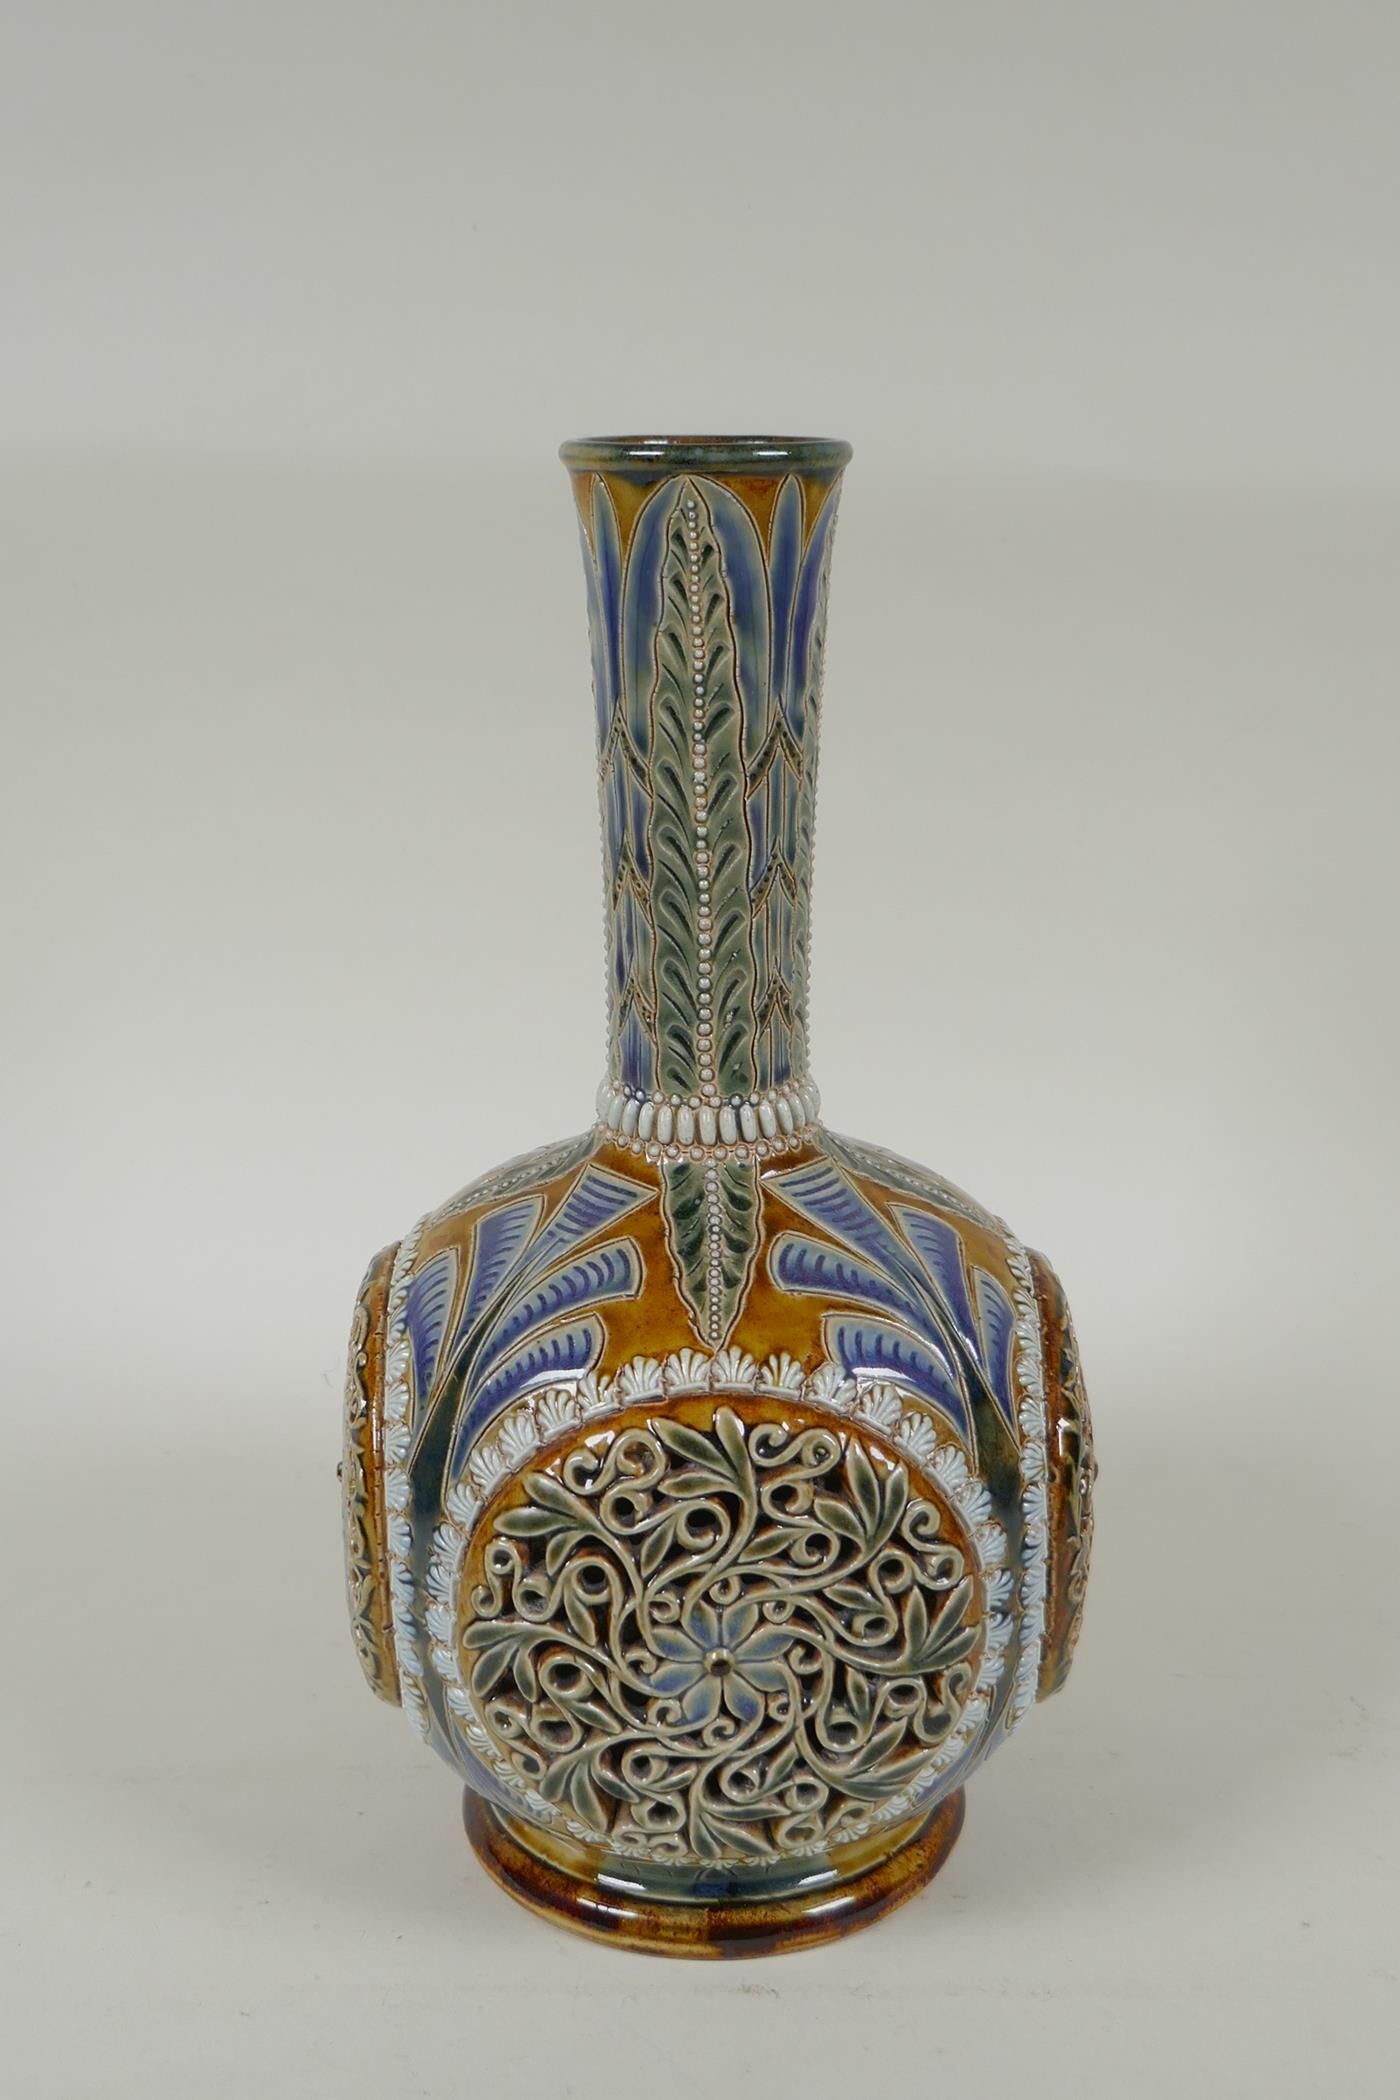 A C19th Doulton Lambeth stoneware vase by Emily E. Stormer, decorated with raised reticulated floral - Image 2 of 9